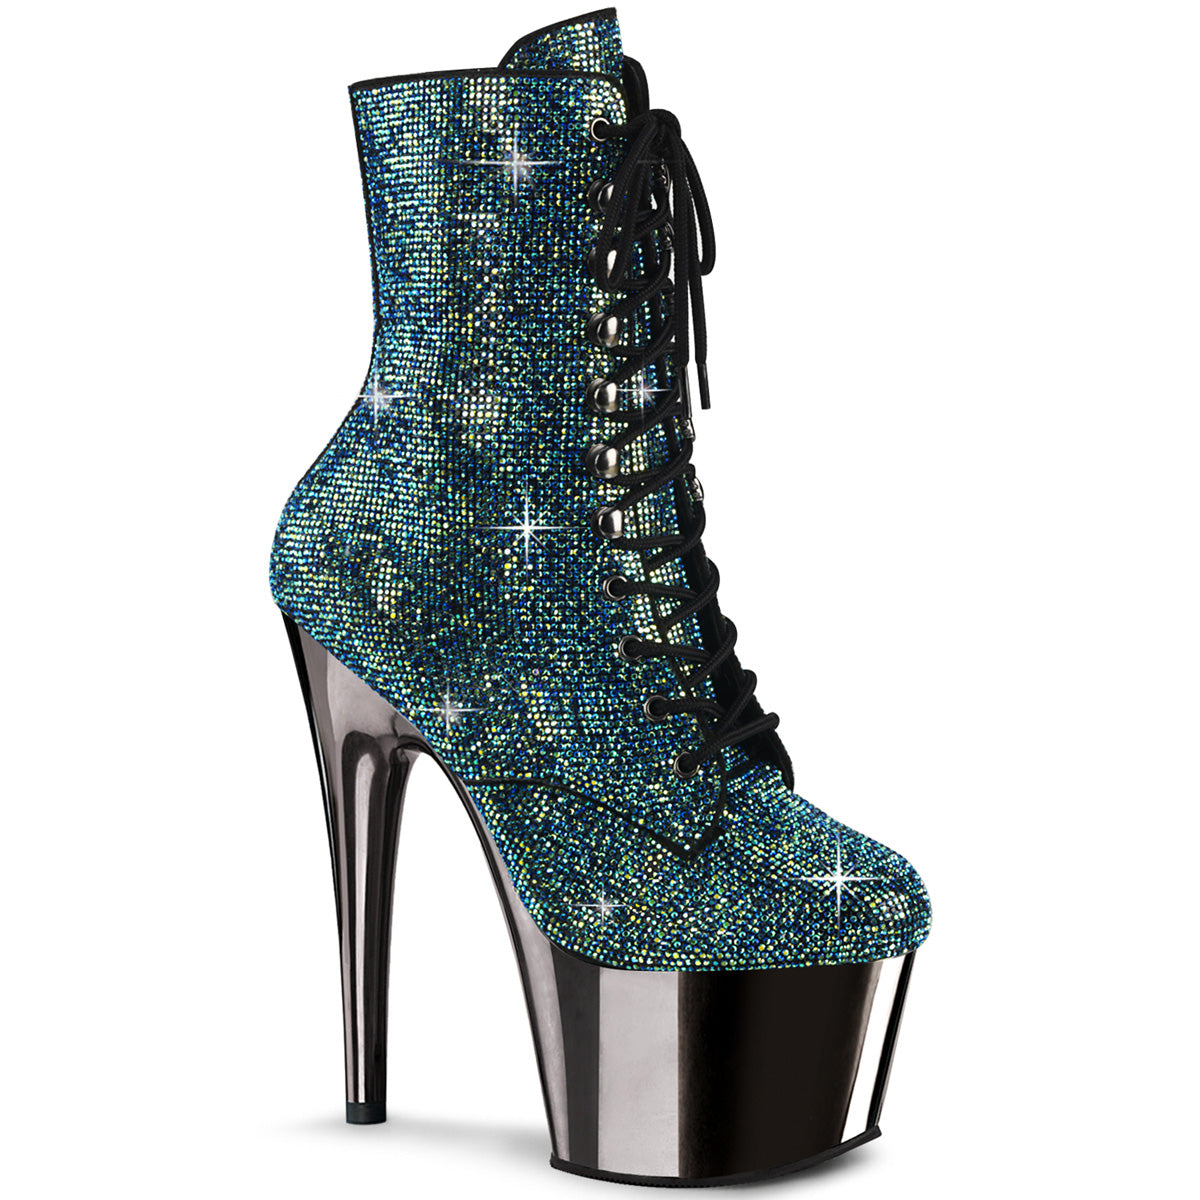 ADORE-1020CHRS Turquoise Multi Rhinestone/Pewter Chrome Ankle Boot Pleaser